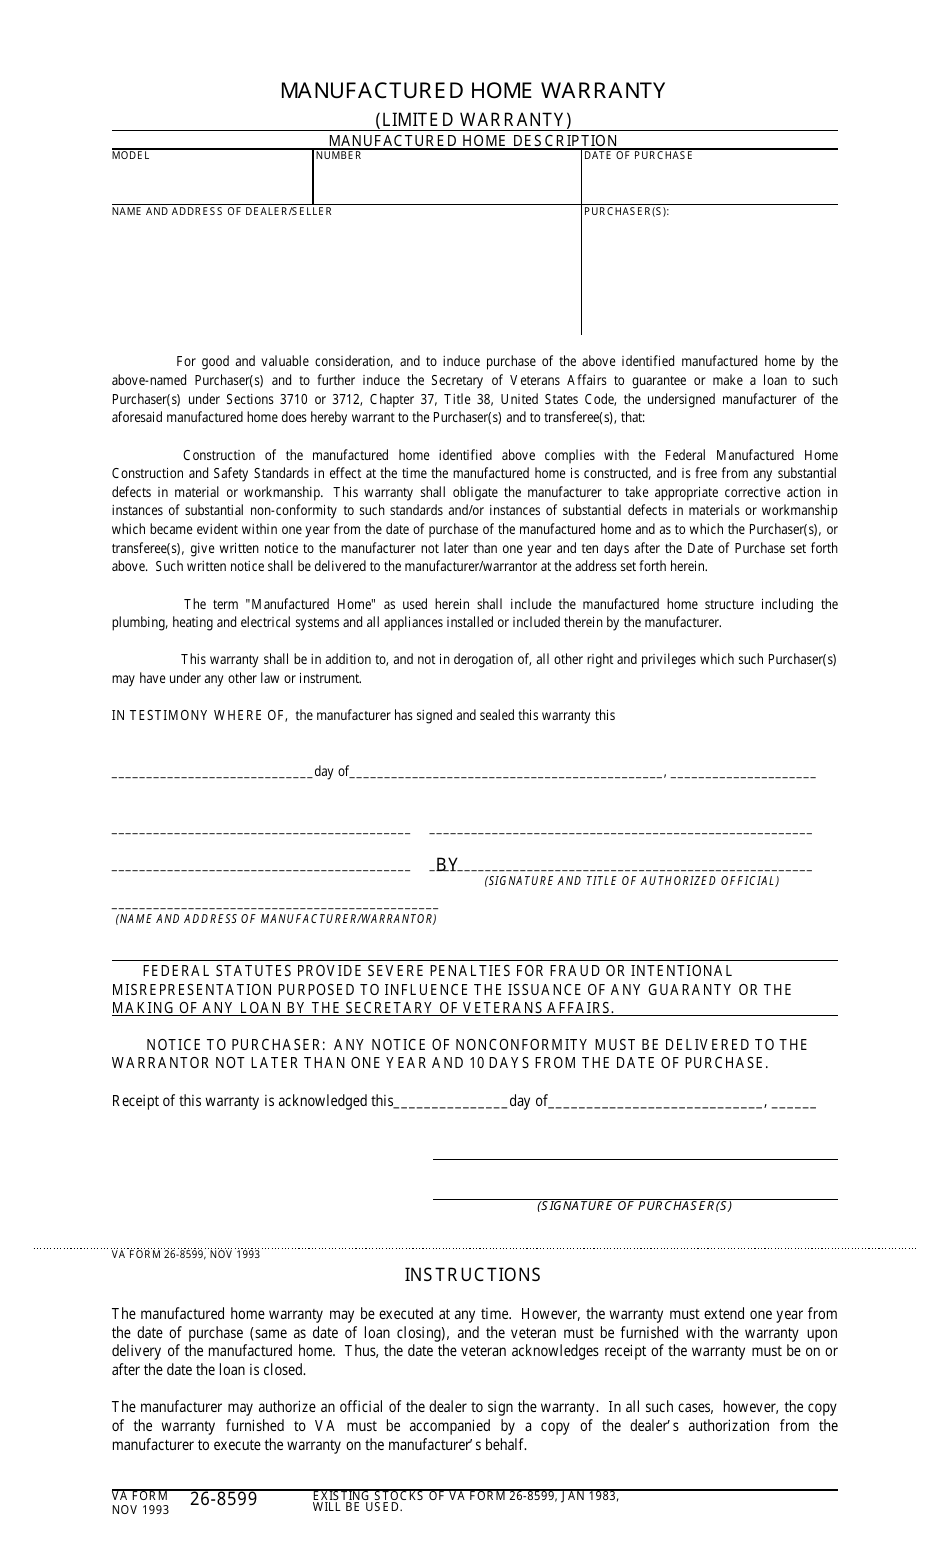 VA Form 26-8599 Manufactured Home Warranty, Page 1